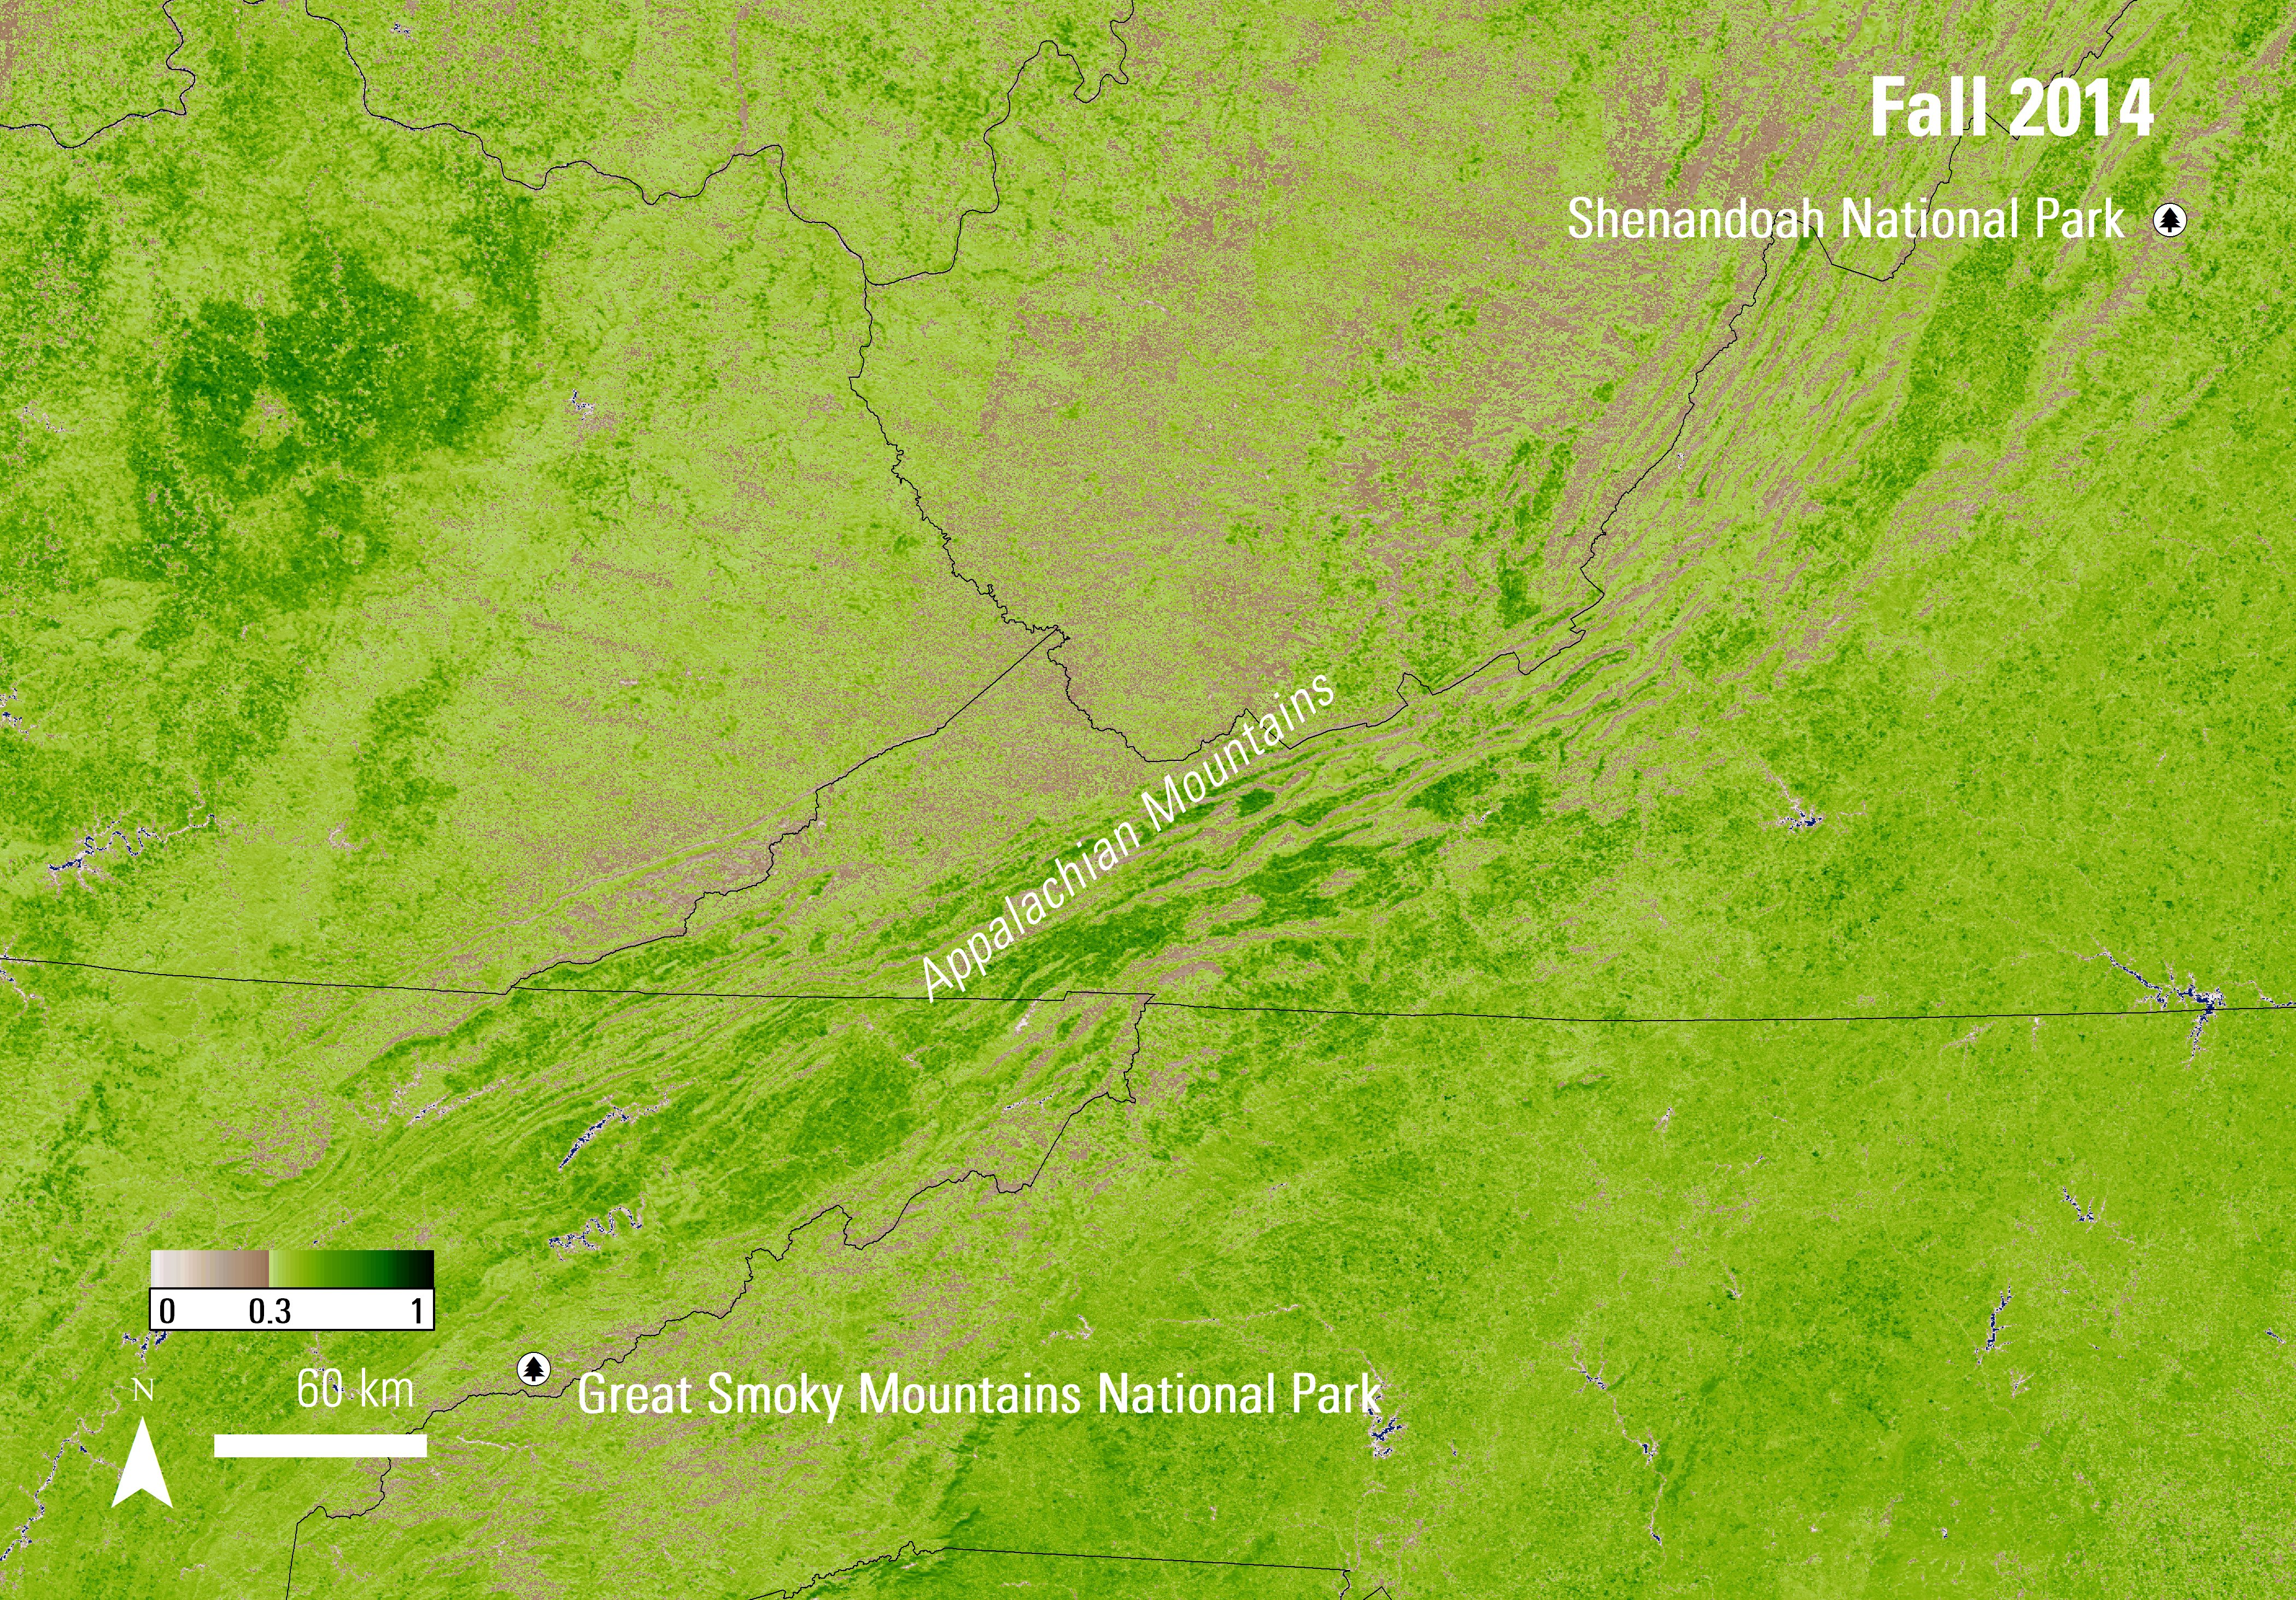 MODIS 250-meter EVI image from fall (November 1 - 16, 2014) over the Appalachian Mountains.